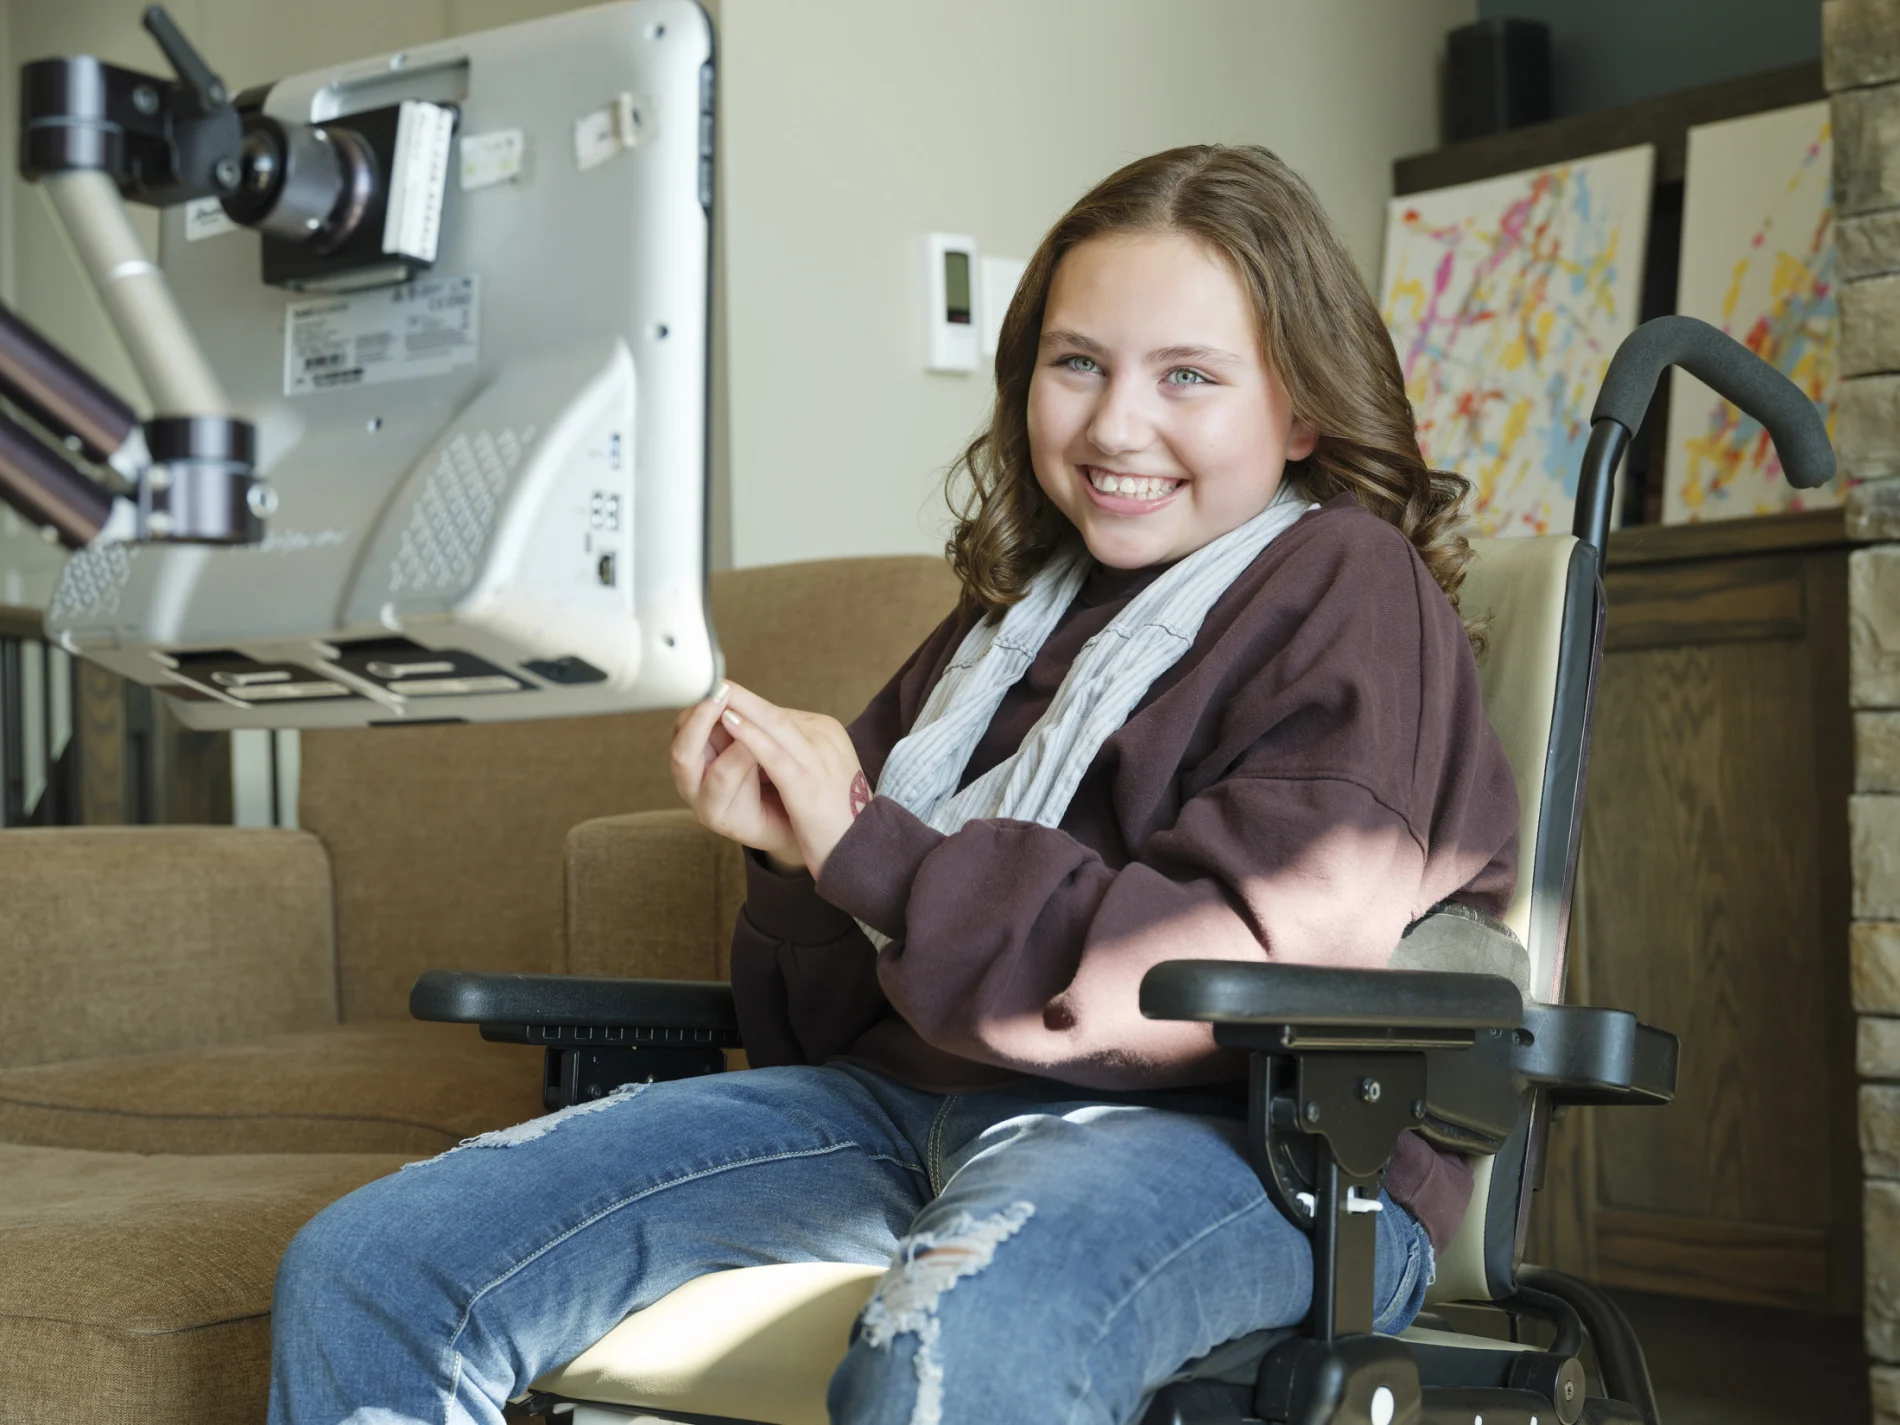 Olivia smiling in her wheelchair while using brain computer interface technology.